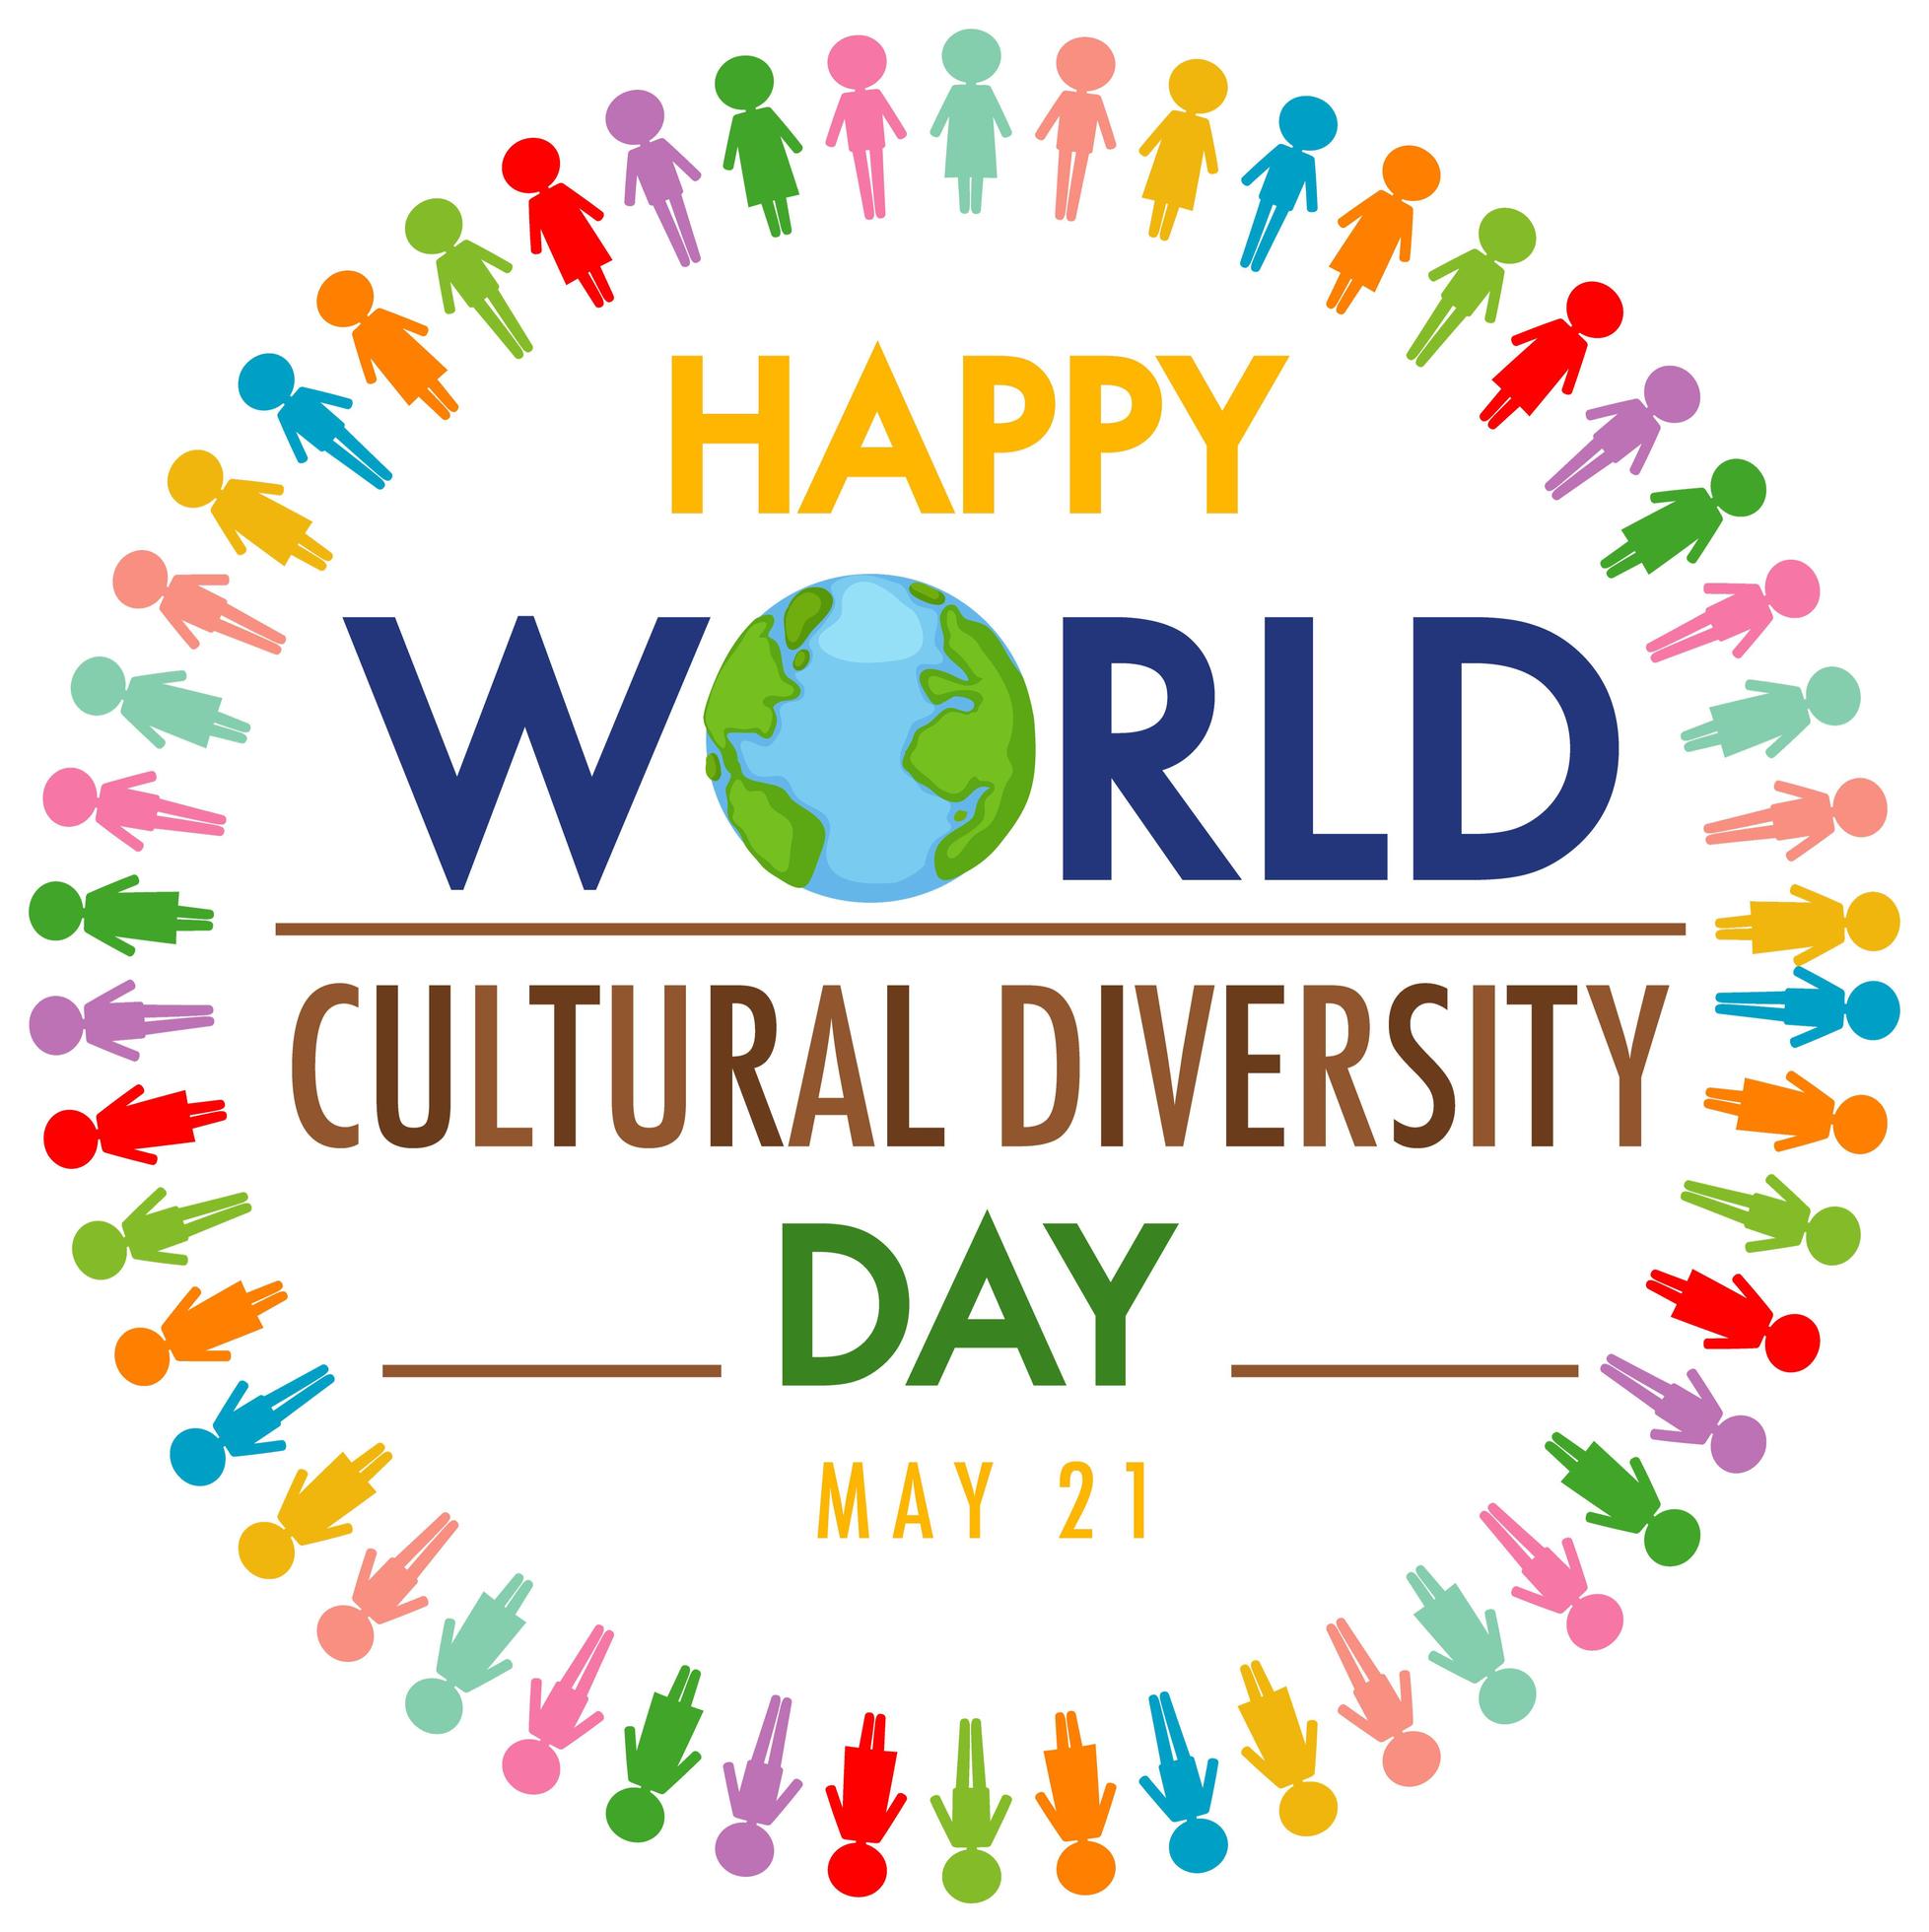 Happy World Cultural Diversity Day logo or banner on the globe with